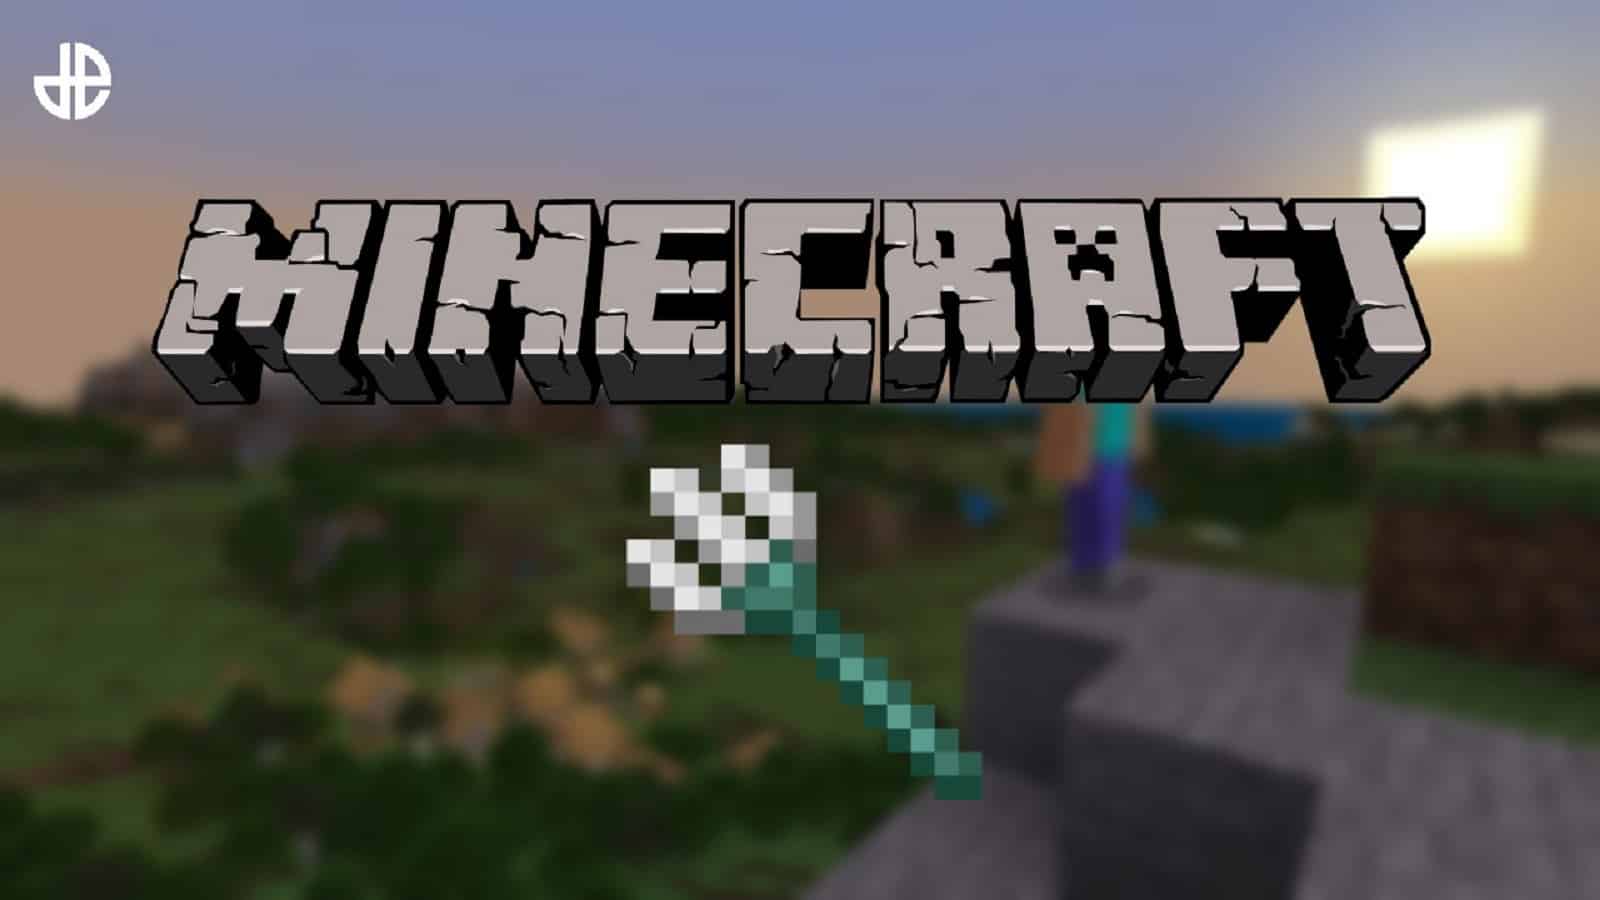 cover art for minecraft featuring a trident.